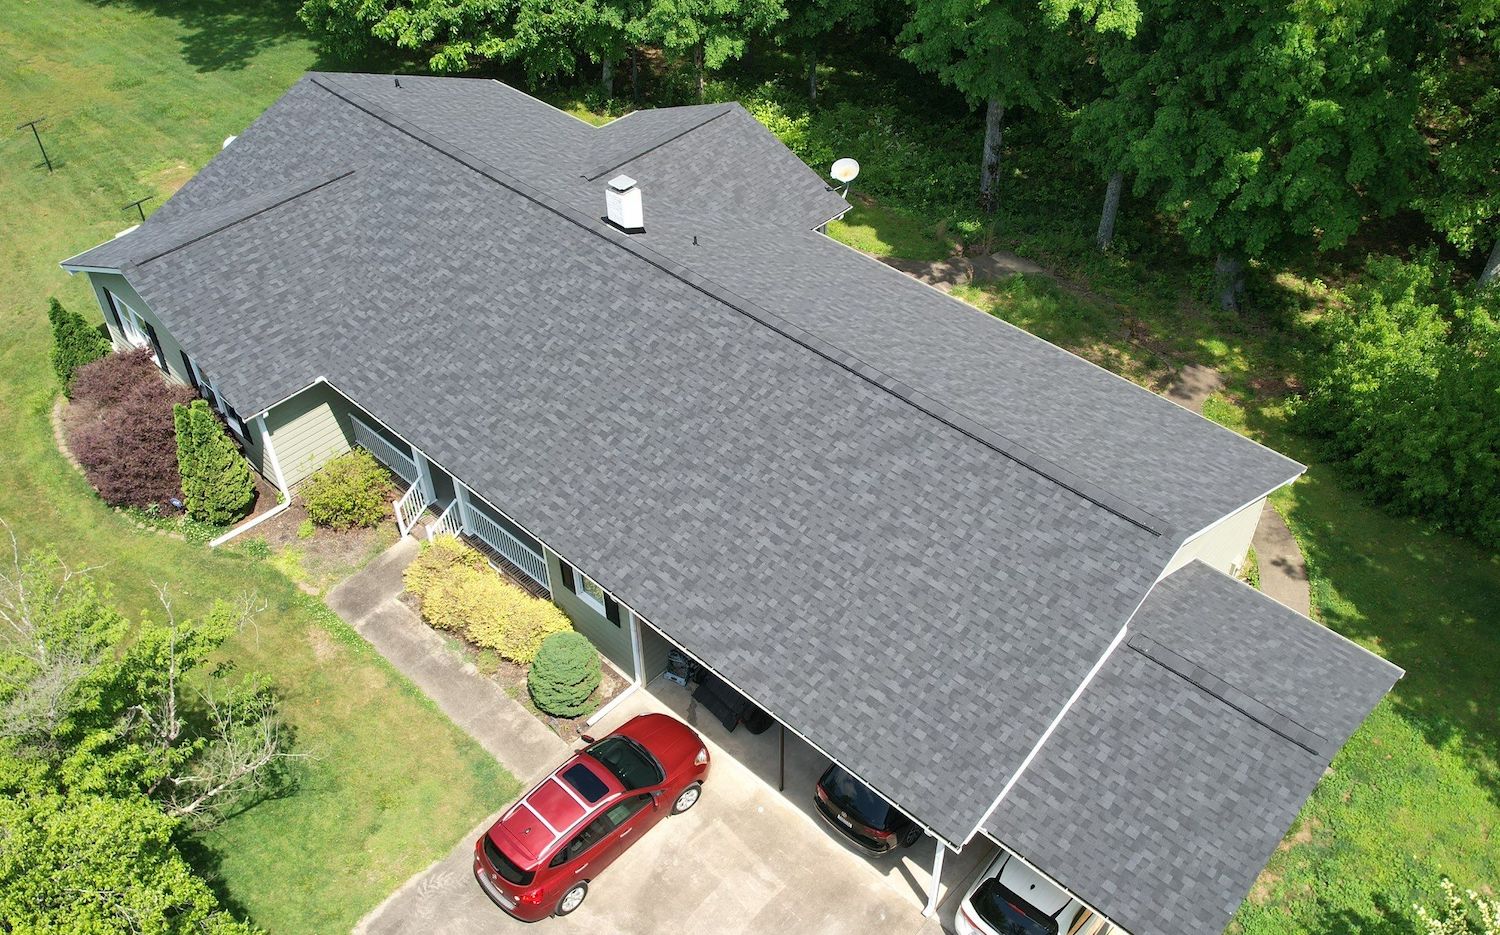 drone view of a house with granite grey architectural asphalt shingle roof and red car in the driveway with green lawn and trees in the surrounding